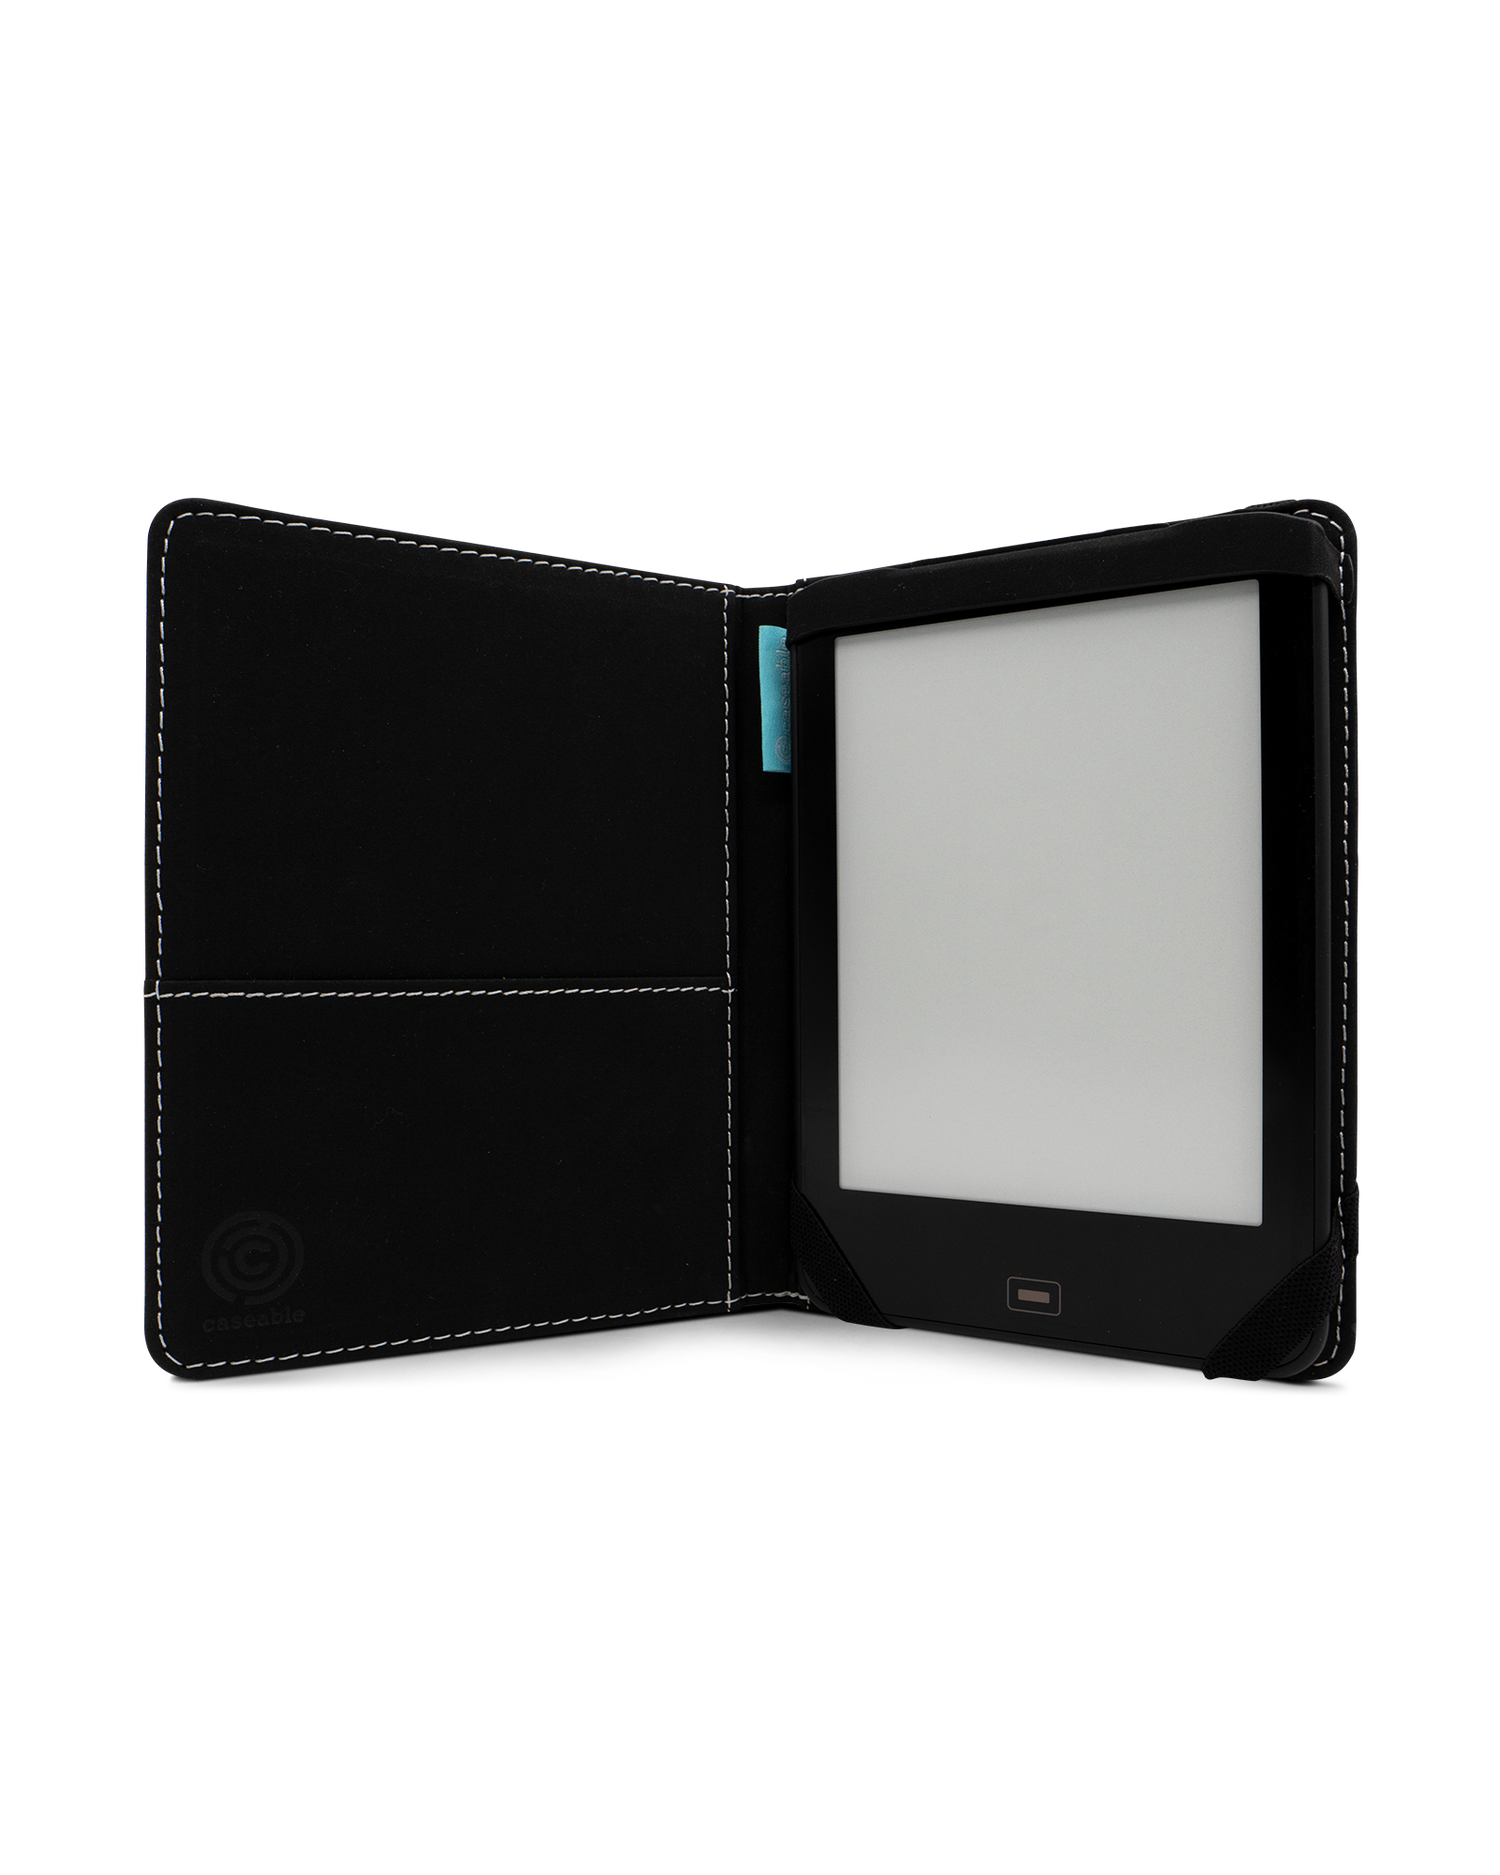 Carbon II eReader Case for tolino vision 1 to 4 HD: Opened interior view